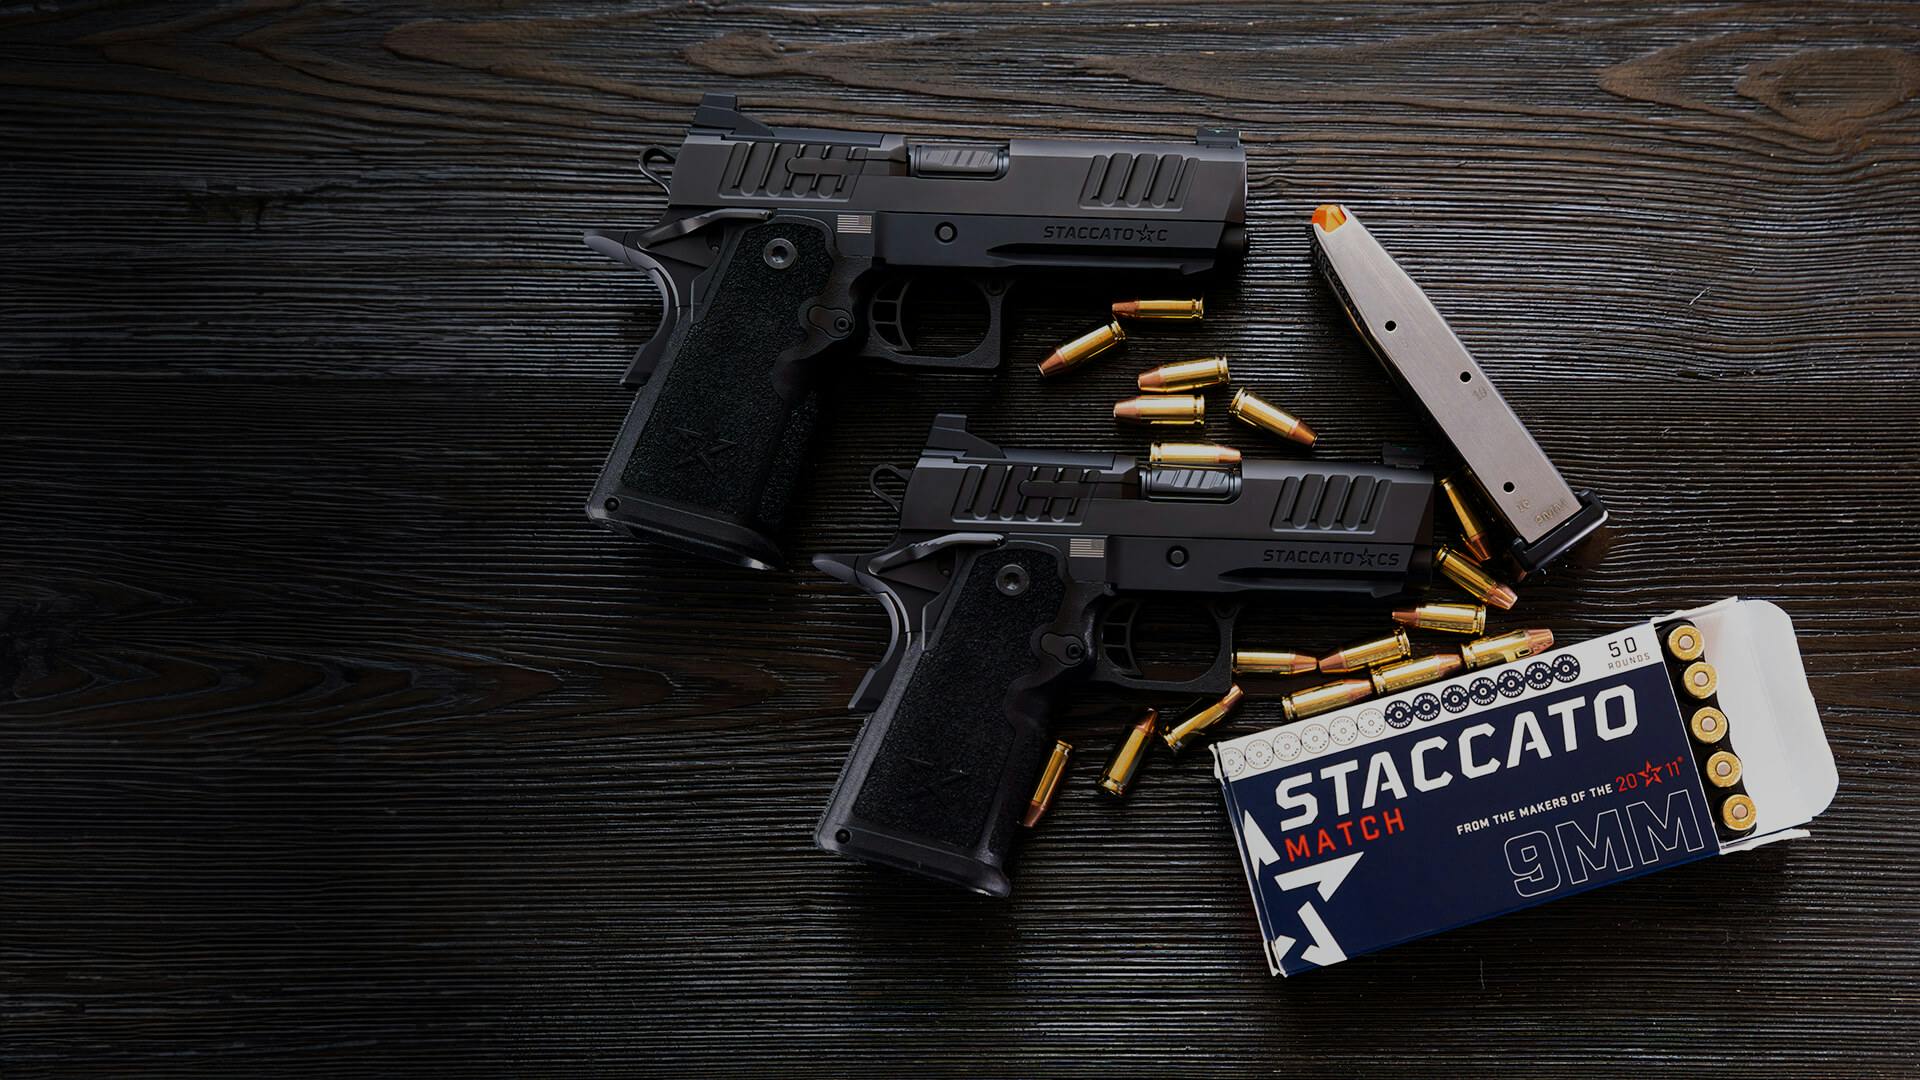 Staccato 2011 Handguns, - Accessories. Pistols, Built Staccato 2011 & For Heroes